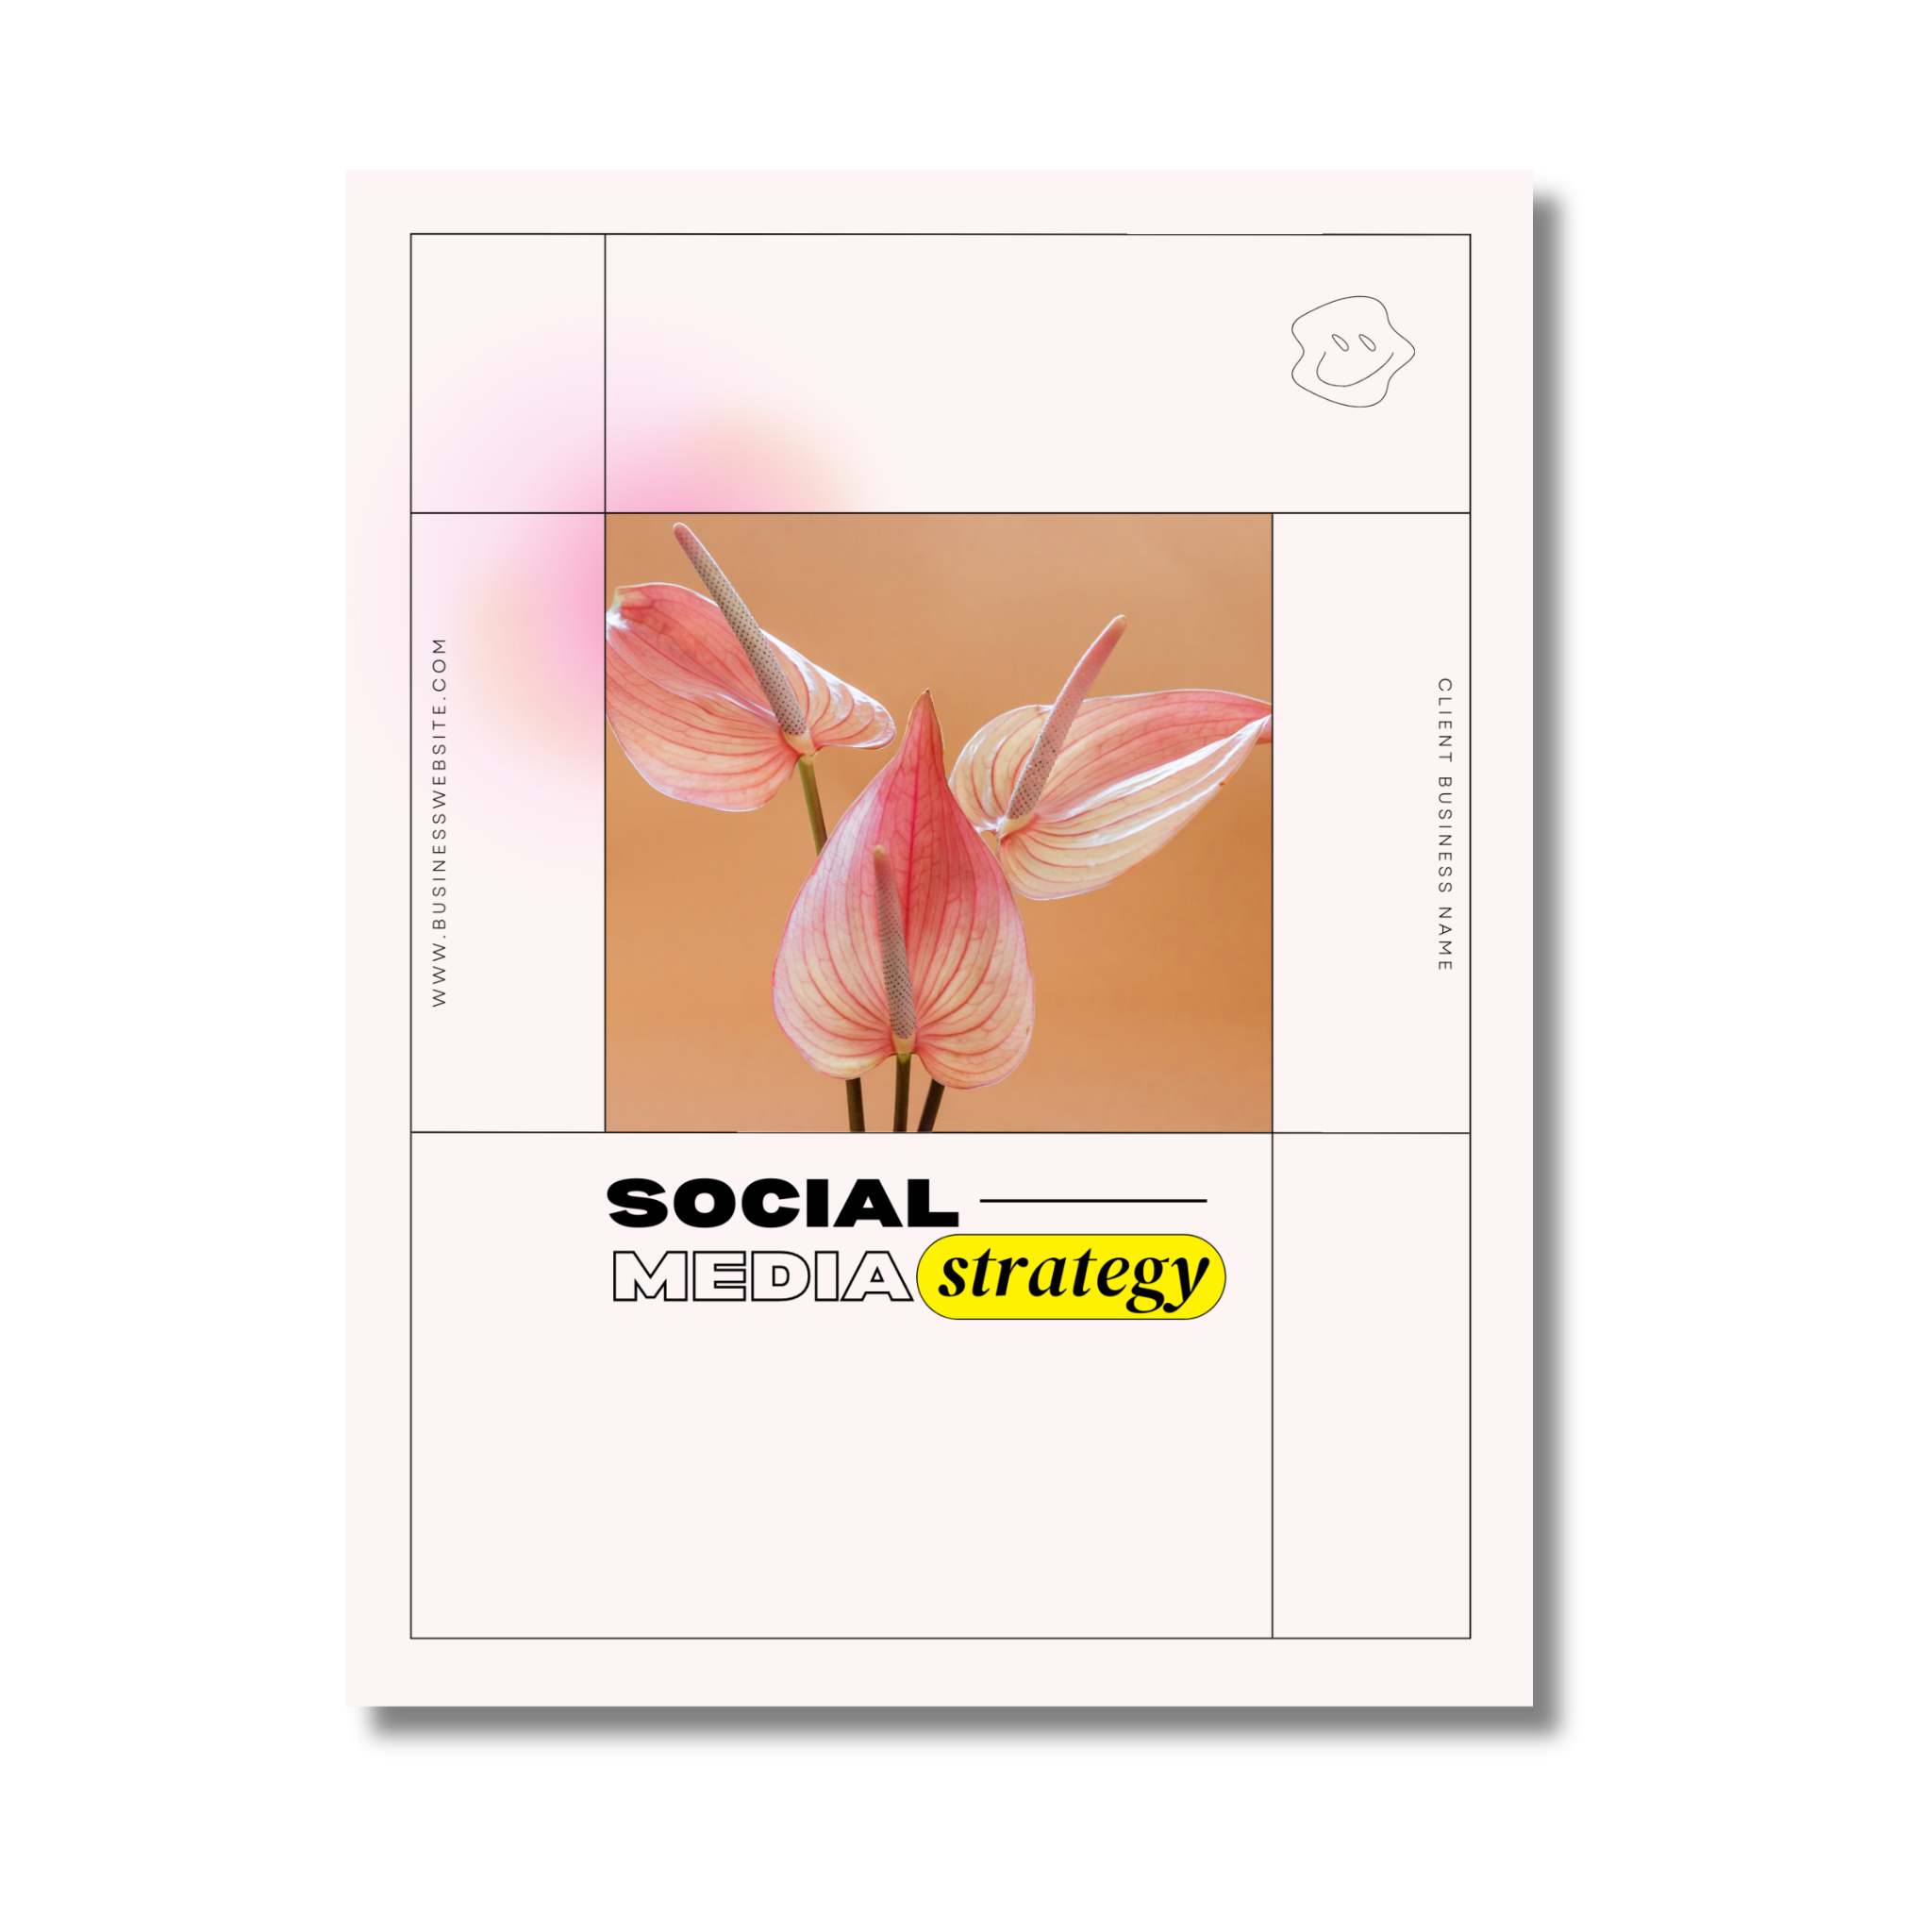 Social Media Strategy Template - In Living Color